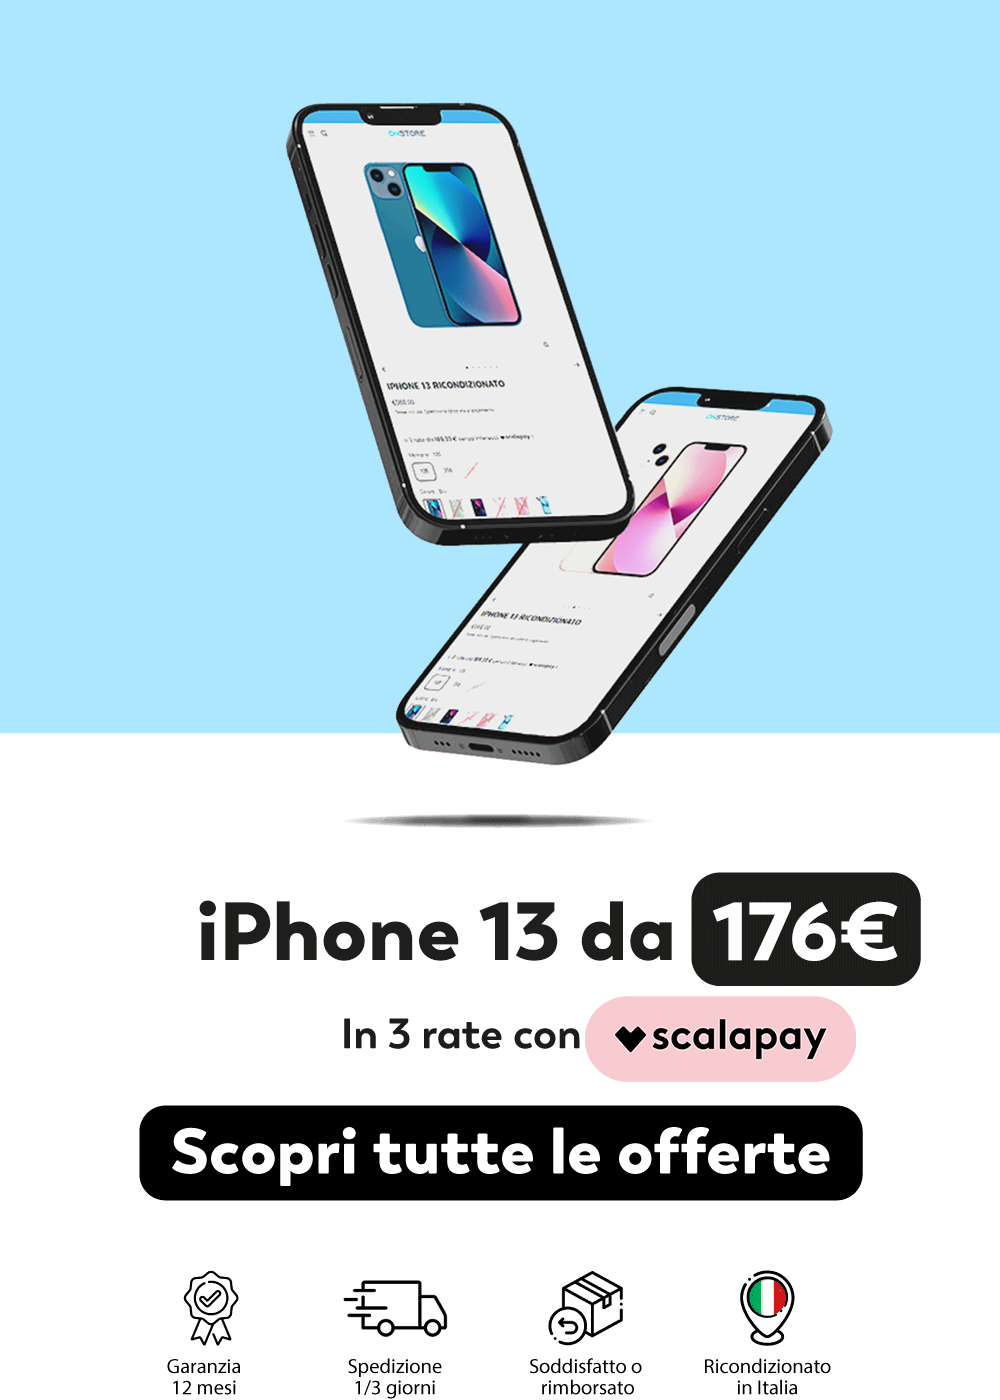 iPhone 13 da 176€ in 3 rate con Scalapay